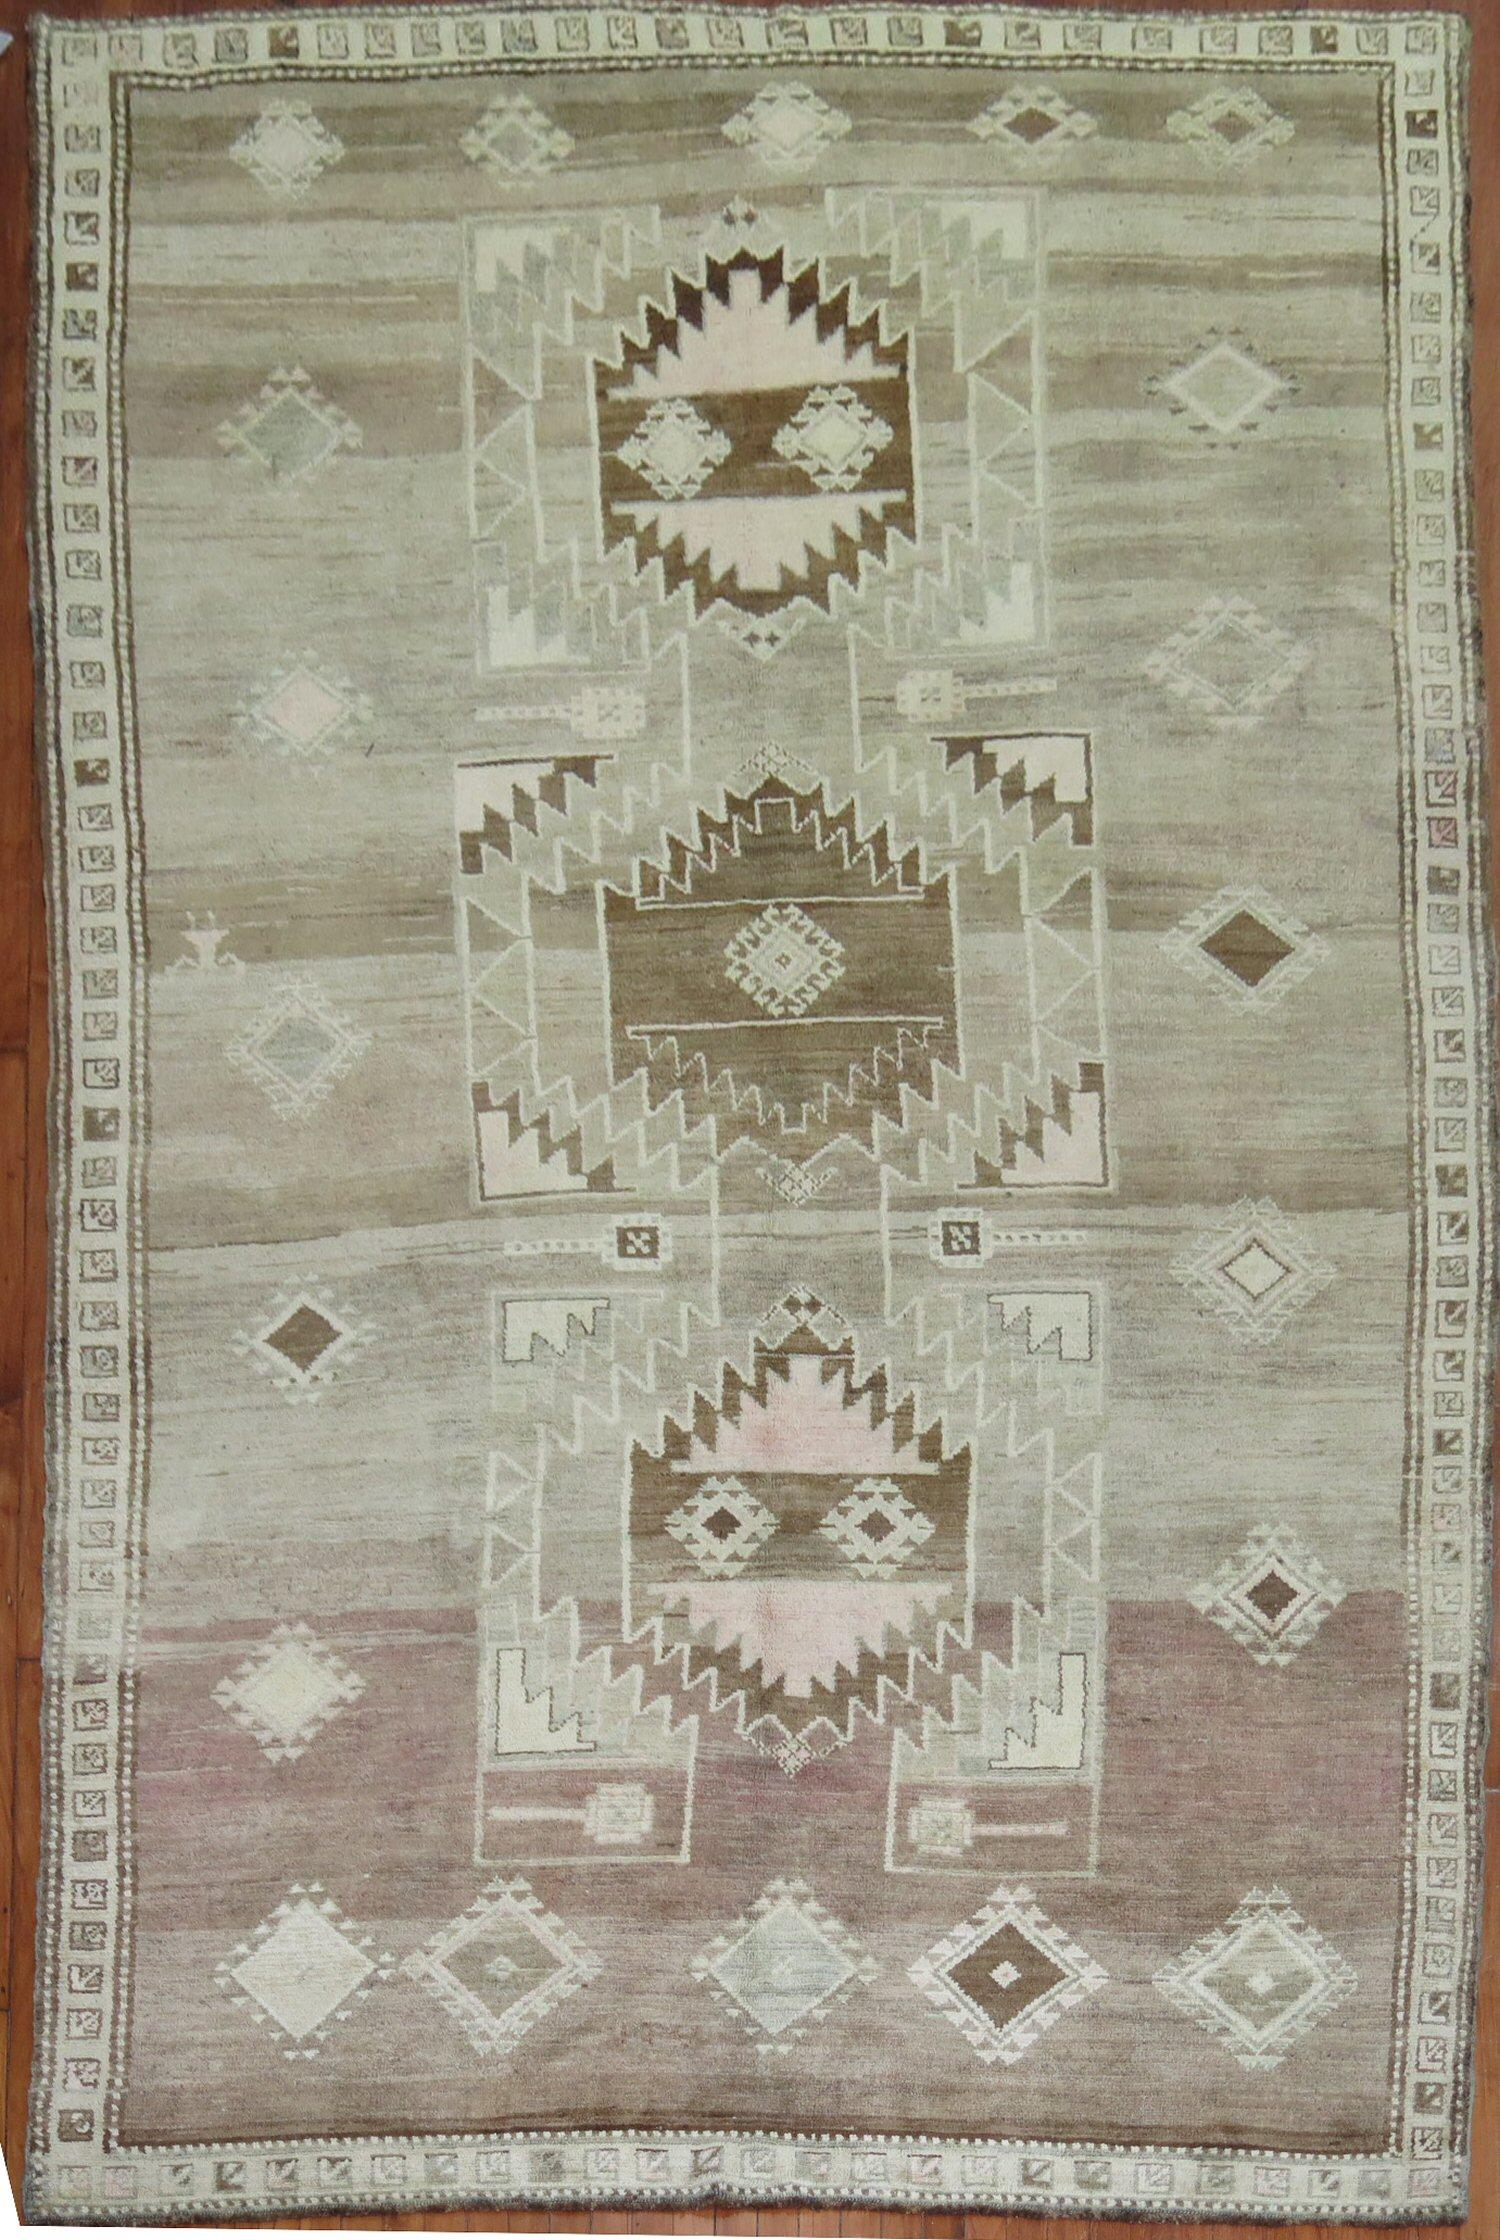 A Turkish Kars tribal room size rug from the middle of the 20th century

6'9'' x 12'2''

Kars is a village located in Northeast of Turkey. The weavers in this area tend to make long runners and long odd size gallery rugs, with large medallions often